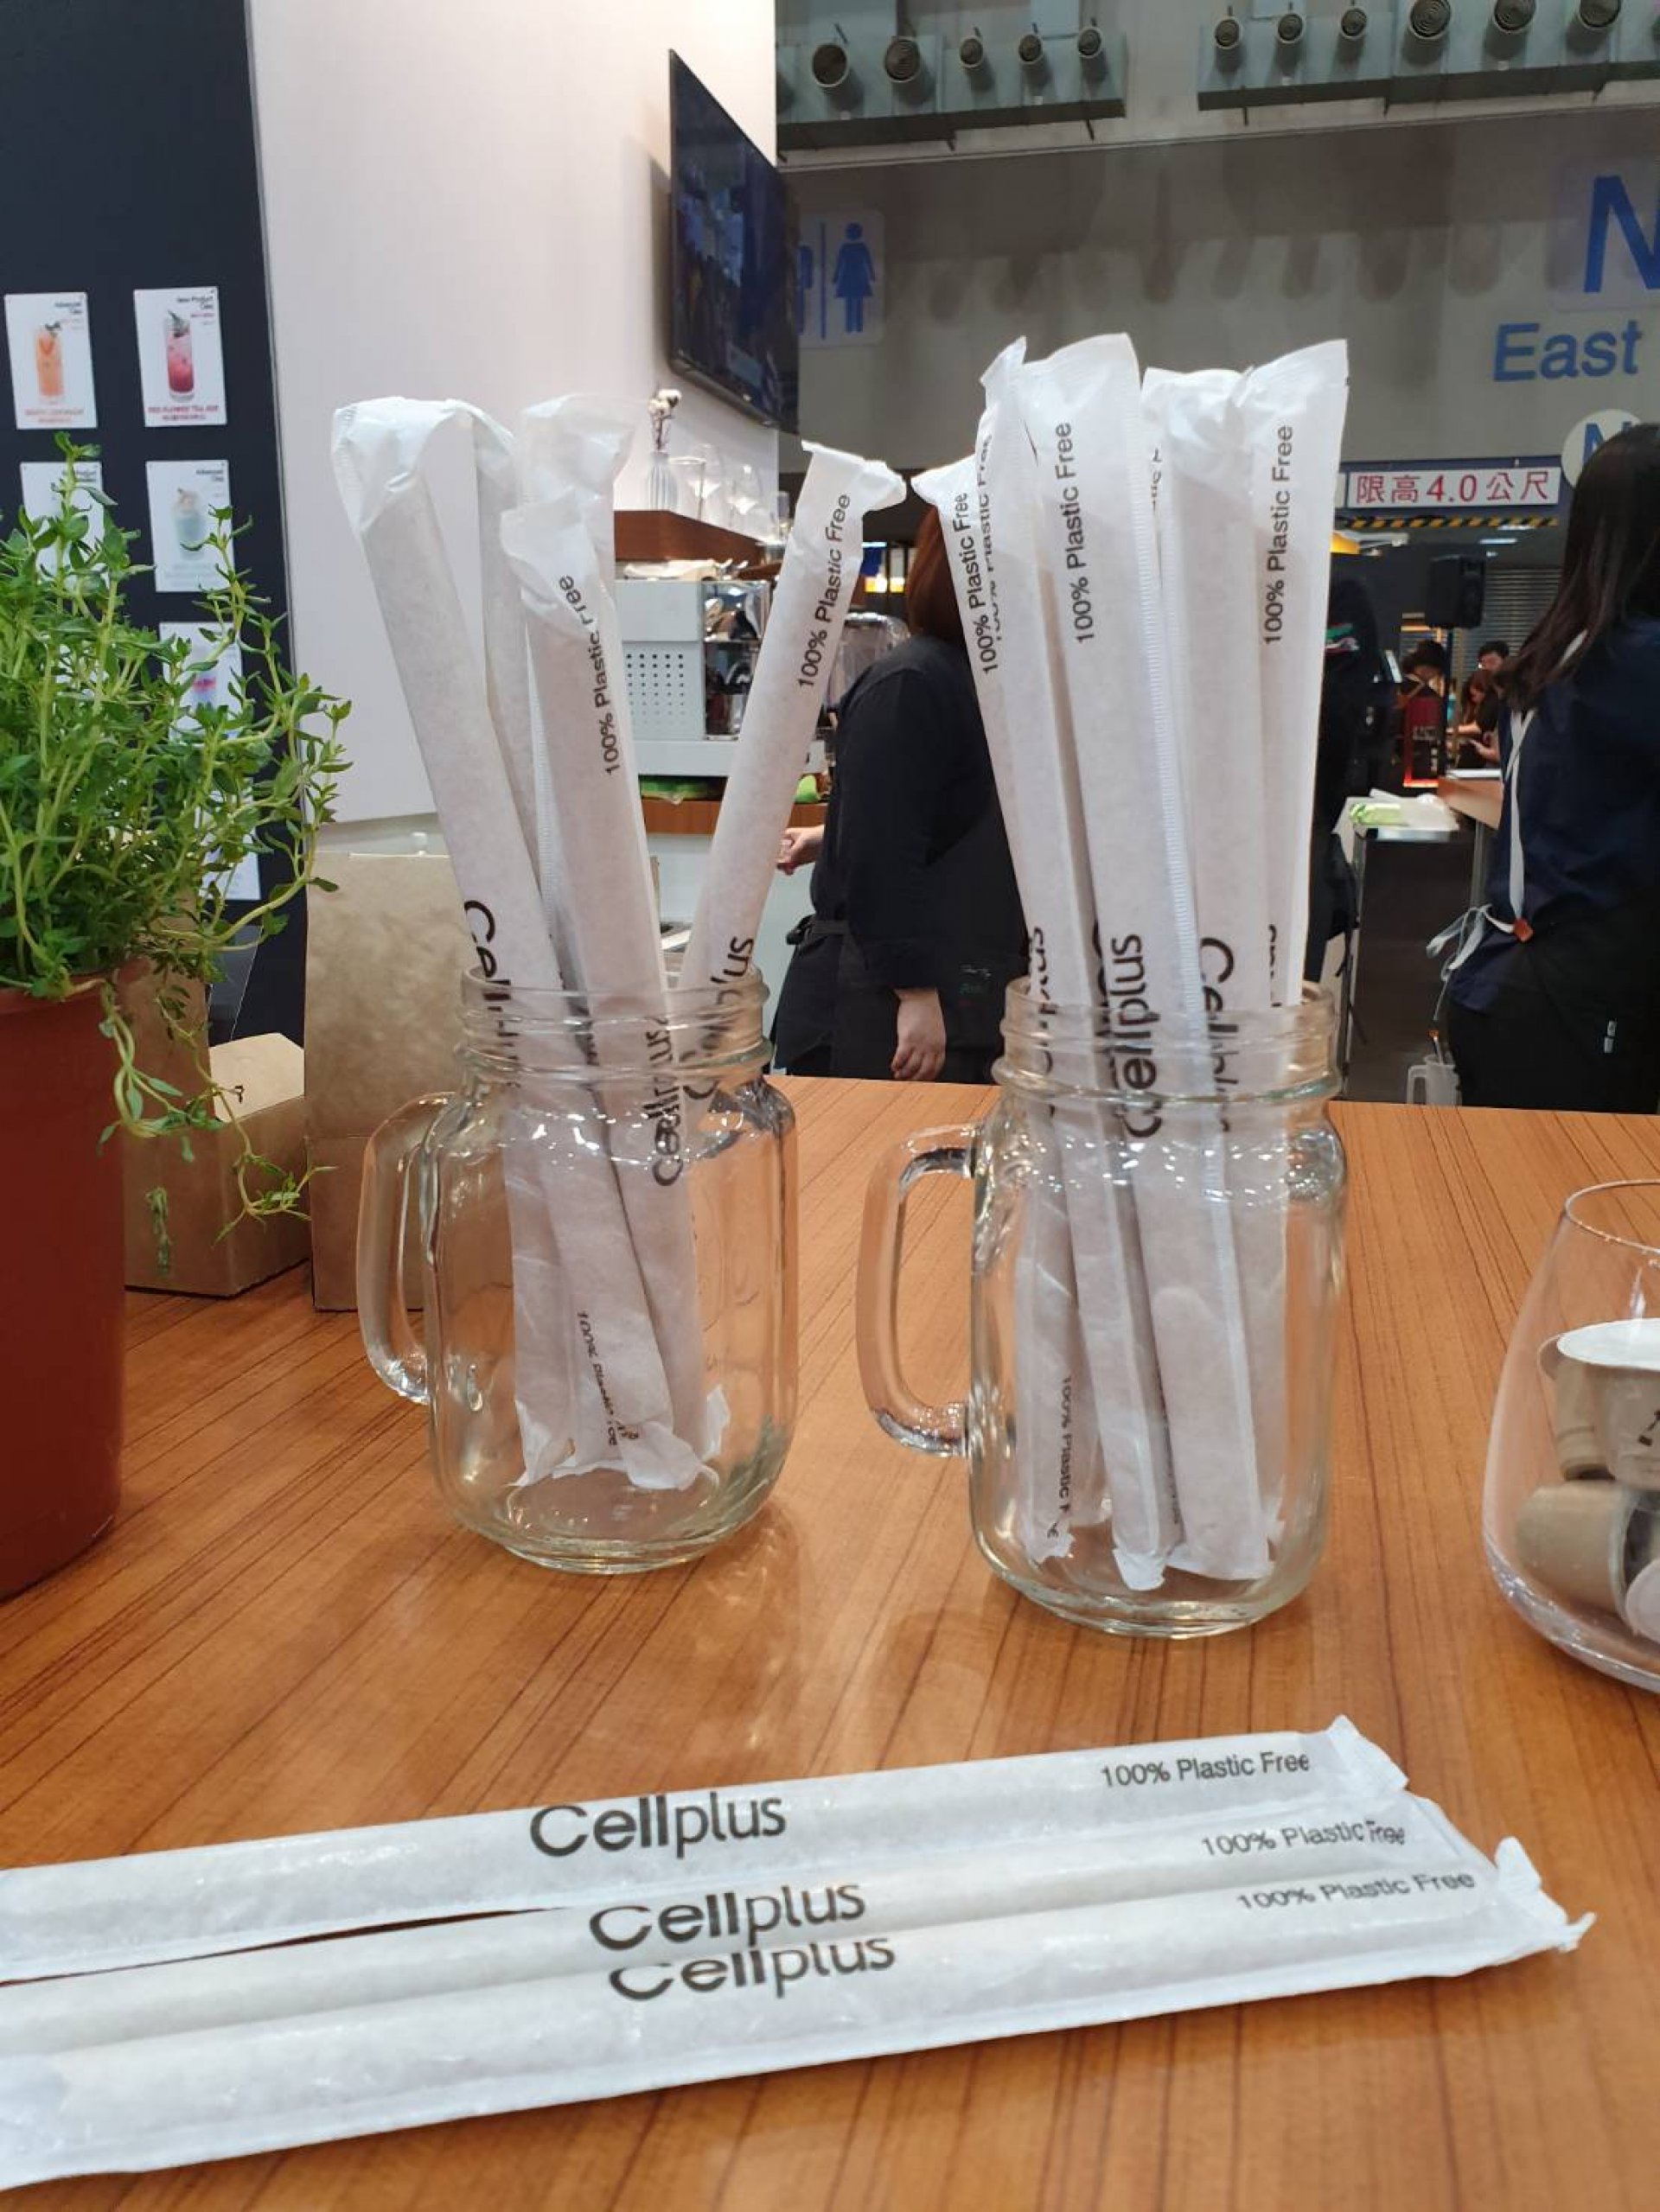 CellPlus-The combination of Beautiful pearl and Bamboo straws